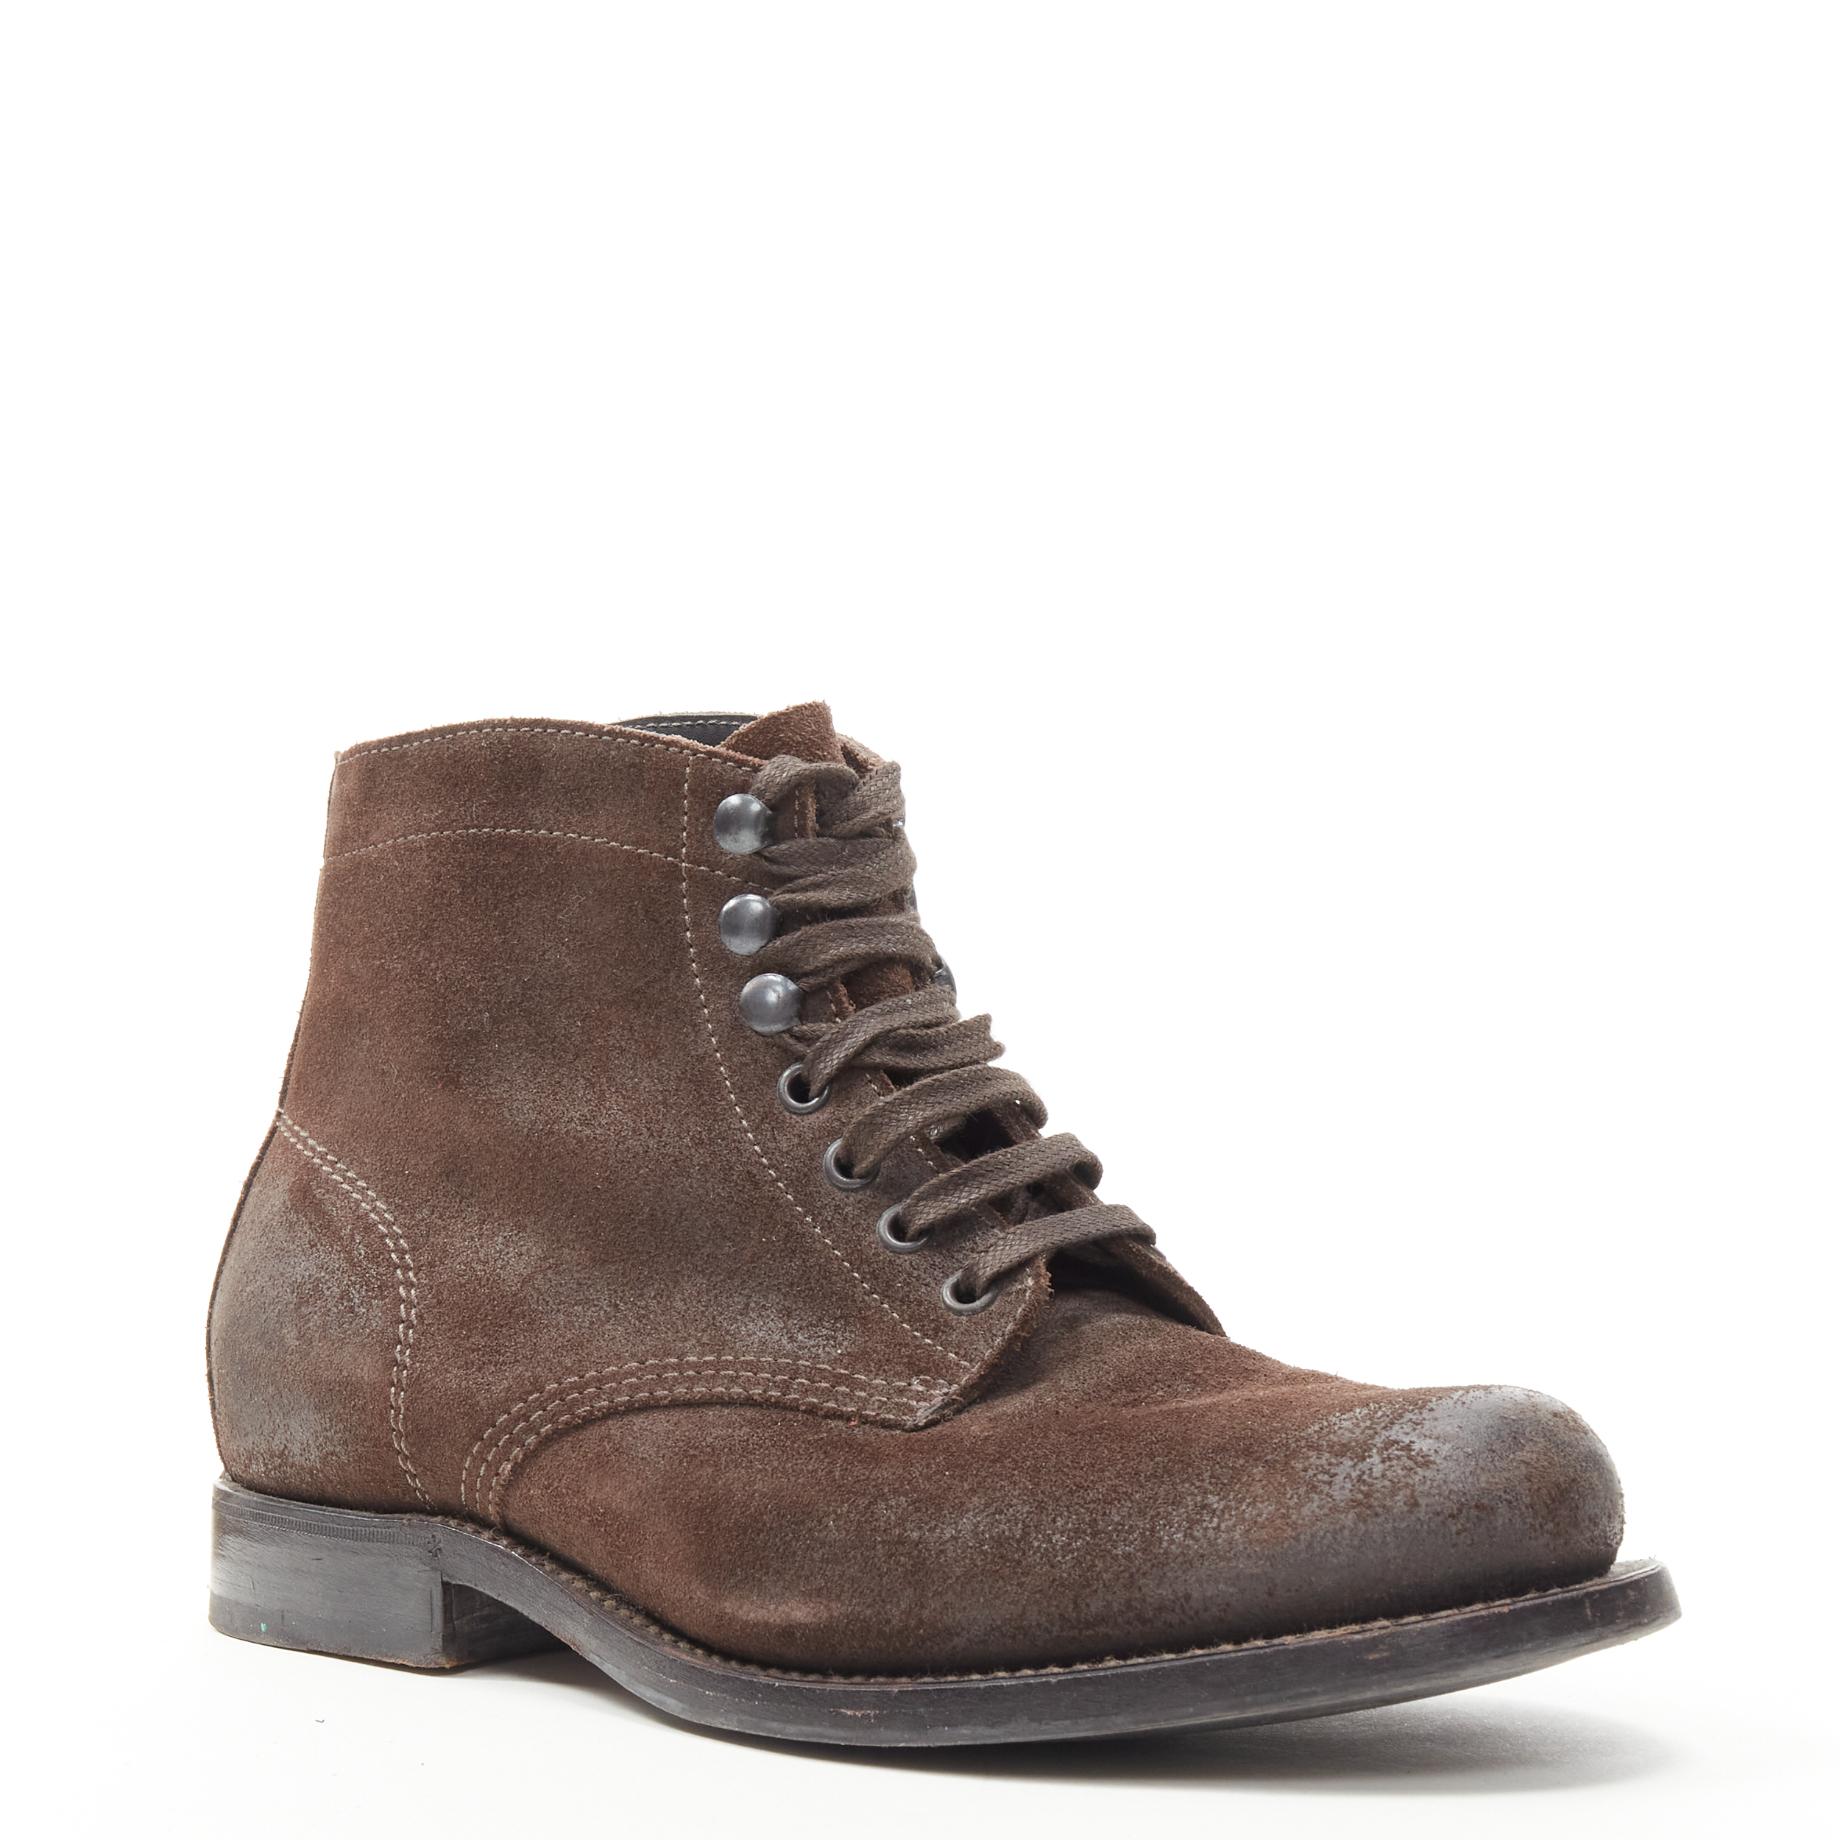 BOTTEGA VENETA brown leather lace up ankle boots EU40 US7
Reference: CNLE/A00218
Brand: Bottega Veneta
Material: Leather
Color: Brown
Pattern: Solid
Closure: Lace Up
Lining: Leather
Extra Details: Brown blistered leather. Waxed laces. Round toe.